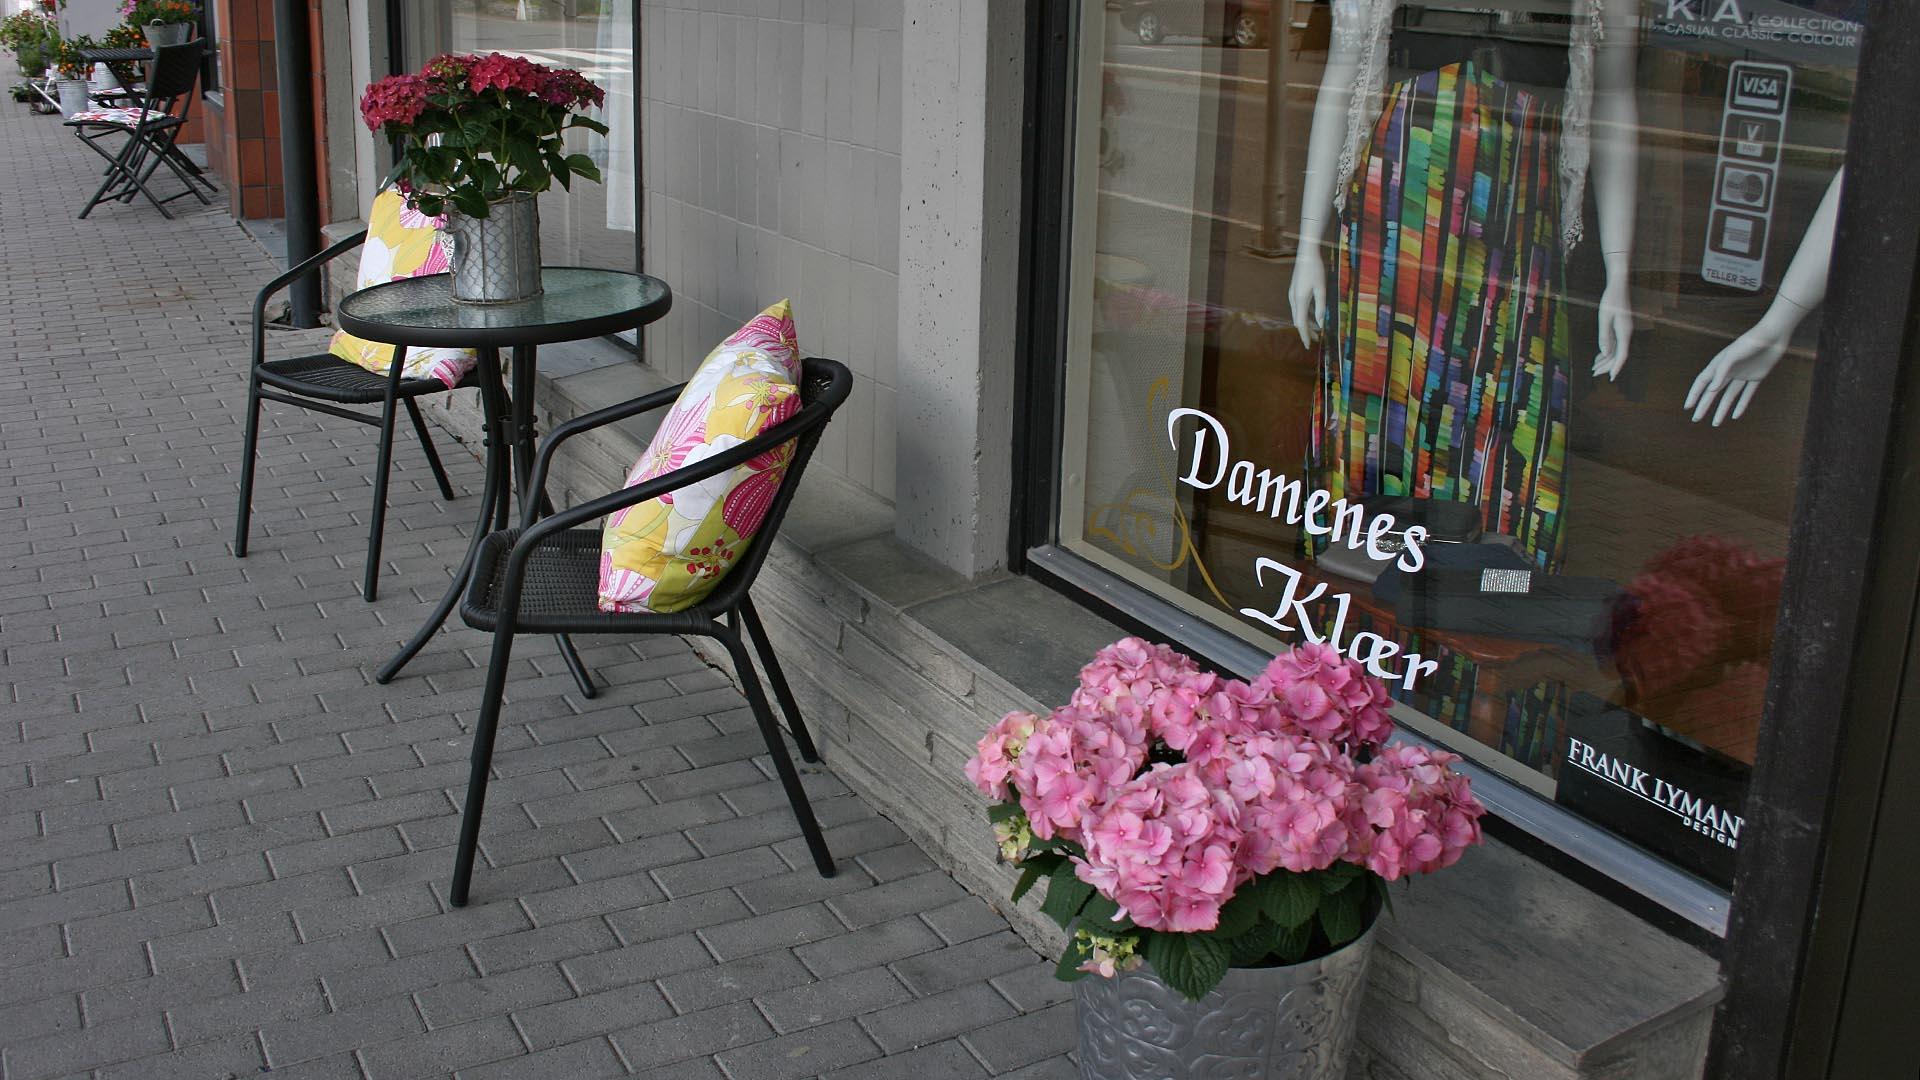 Exterior of a shop decorated with two chairs, a table and a flower.